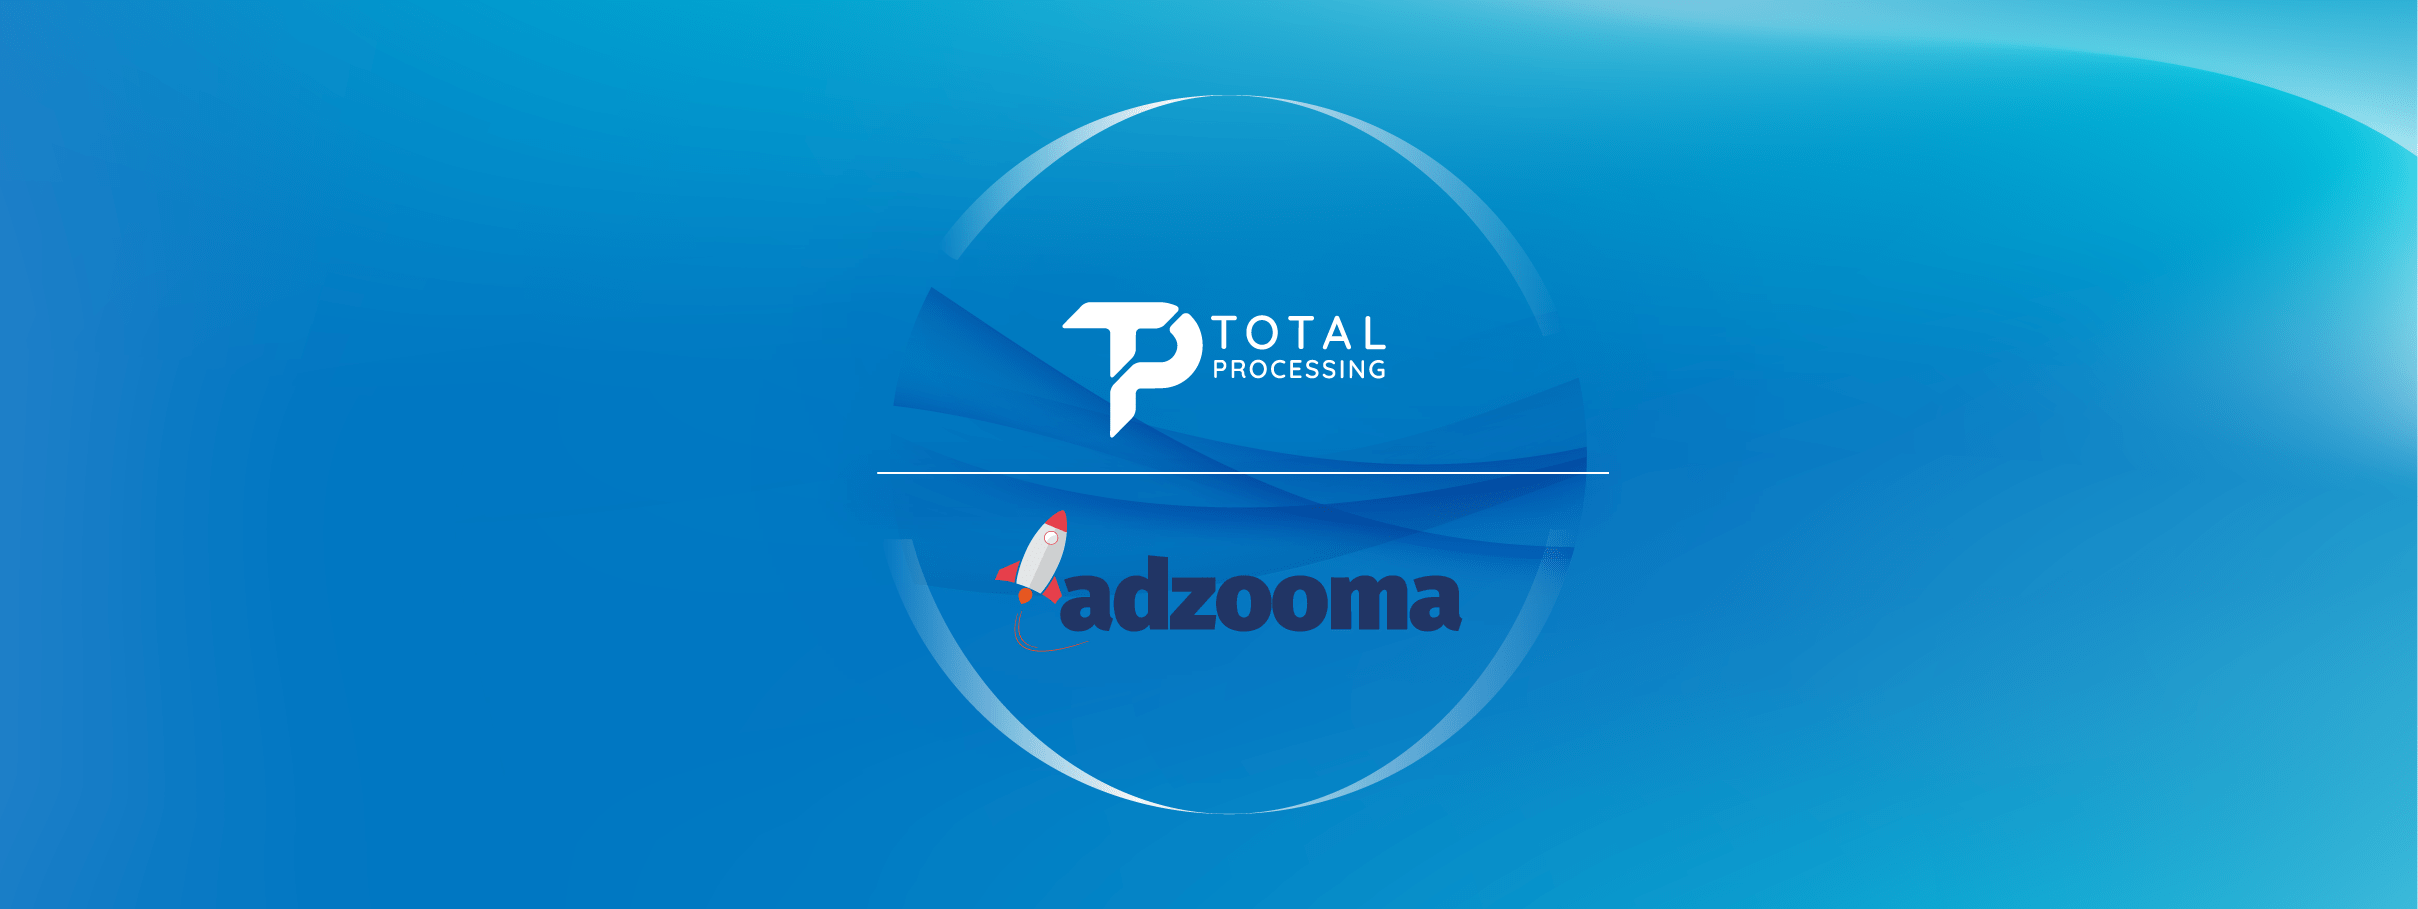 Total Processing Partners With Adzooma